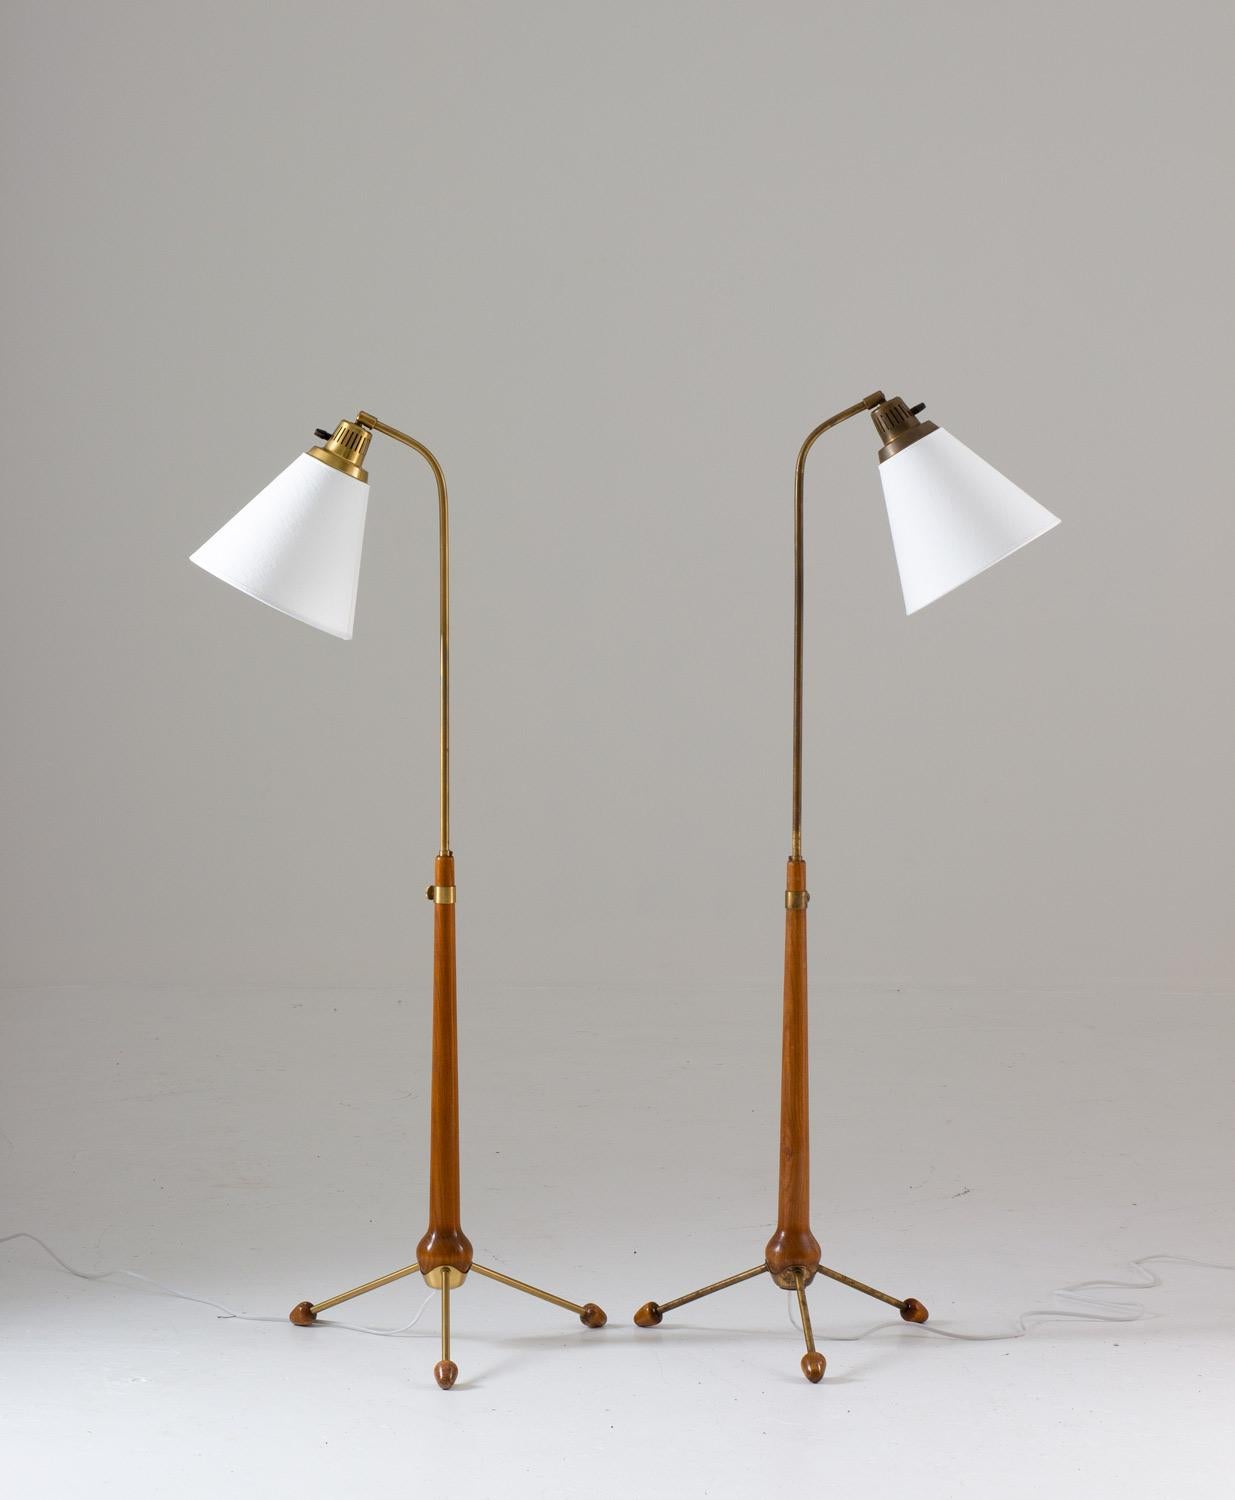 Lovely tripod floor lamps in brass and stained beech by Hans Bergström for Swedish manufacturer Ateljé Lyktan. The height of the lamps are adjustable.
Condition: Lamp 1: Very good original condition with patina on the brass parts. New shade.
Lamp